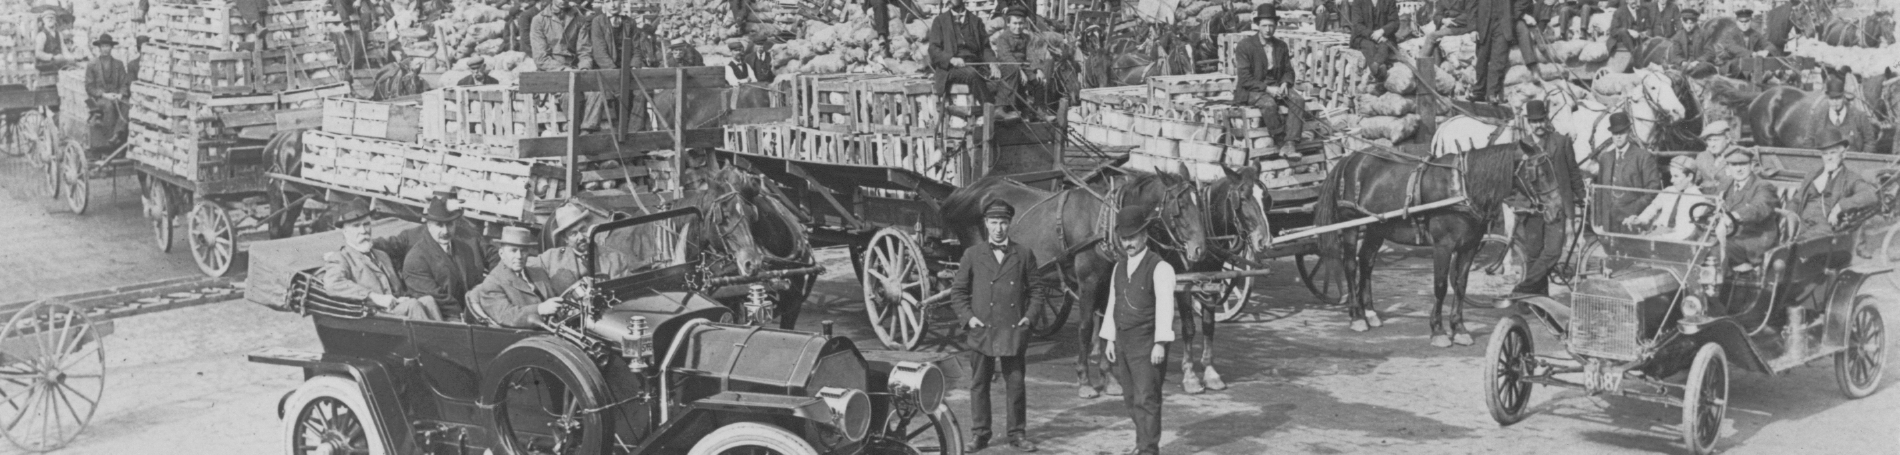 Photo of crowd of wagons and horses from Archives.